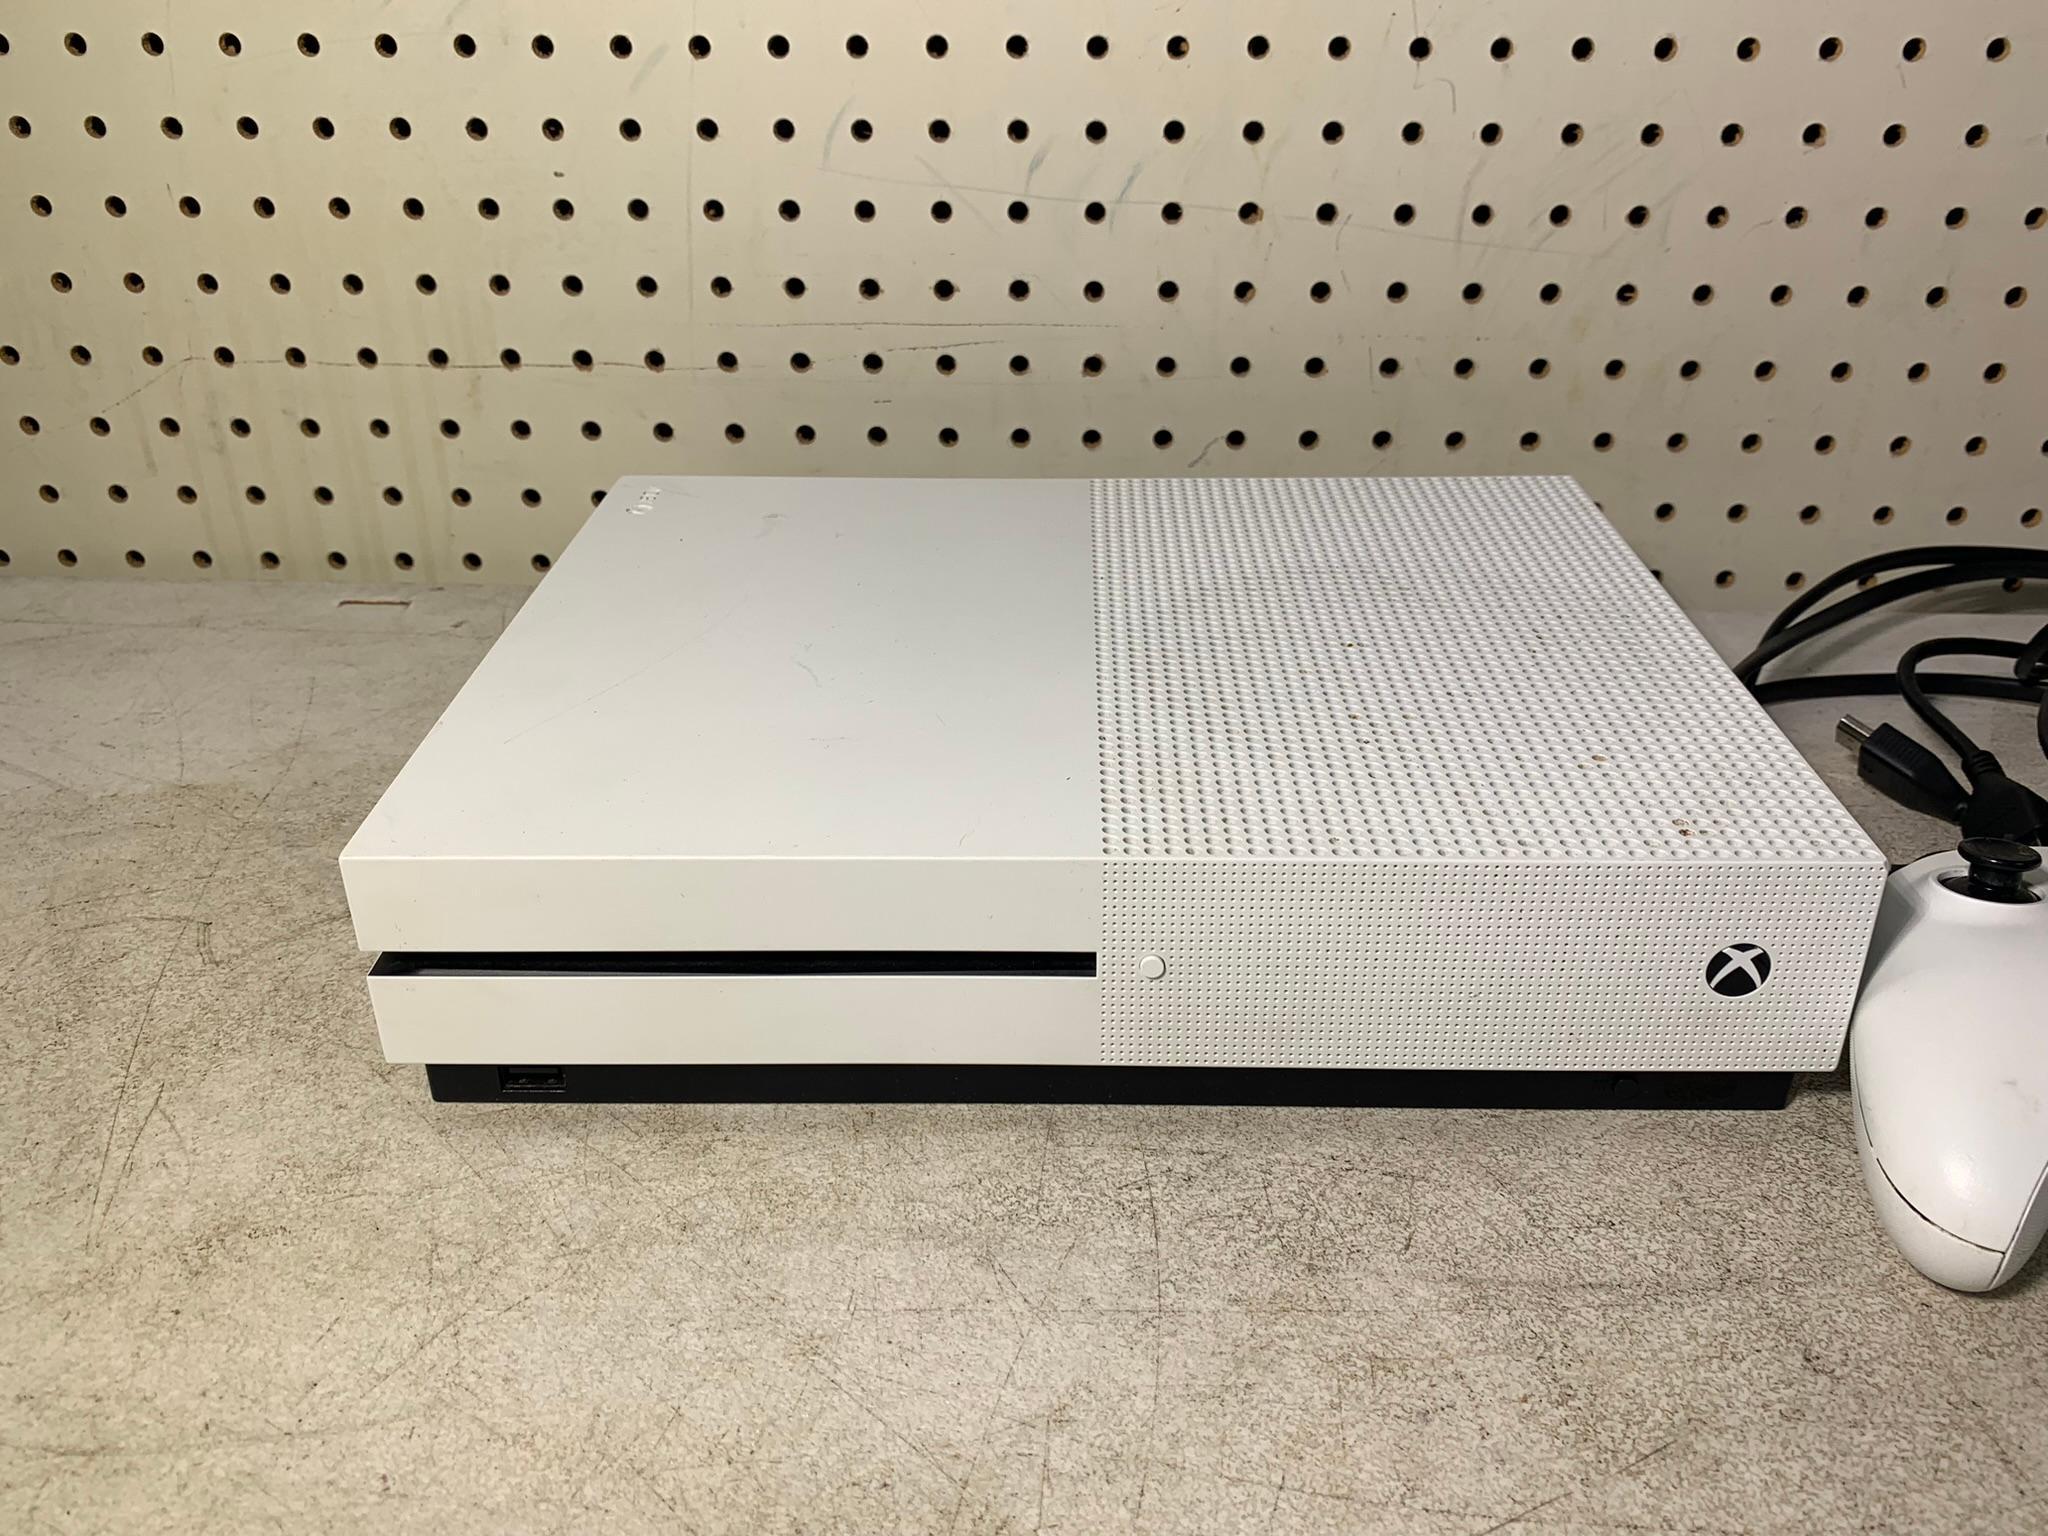 Microsoft XBOX ONE 500GB Console with Controller and Cords